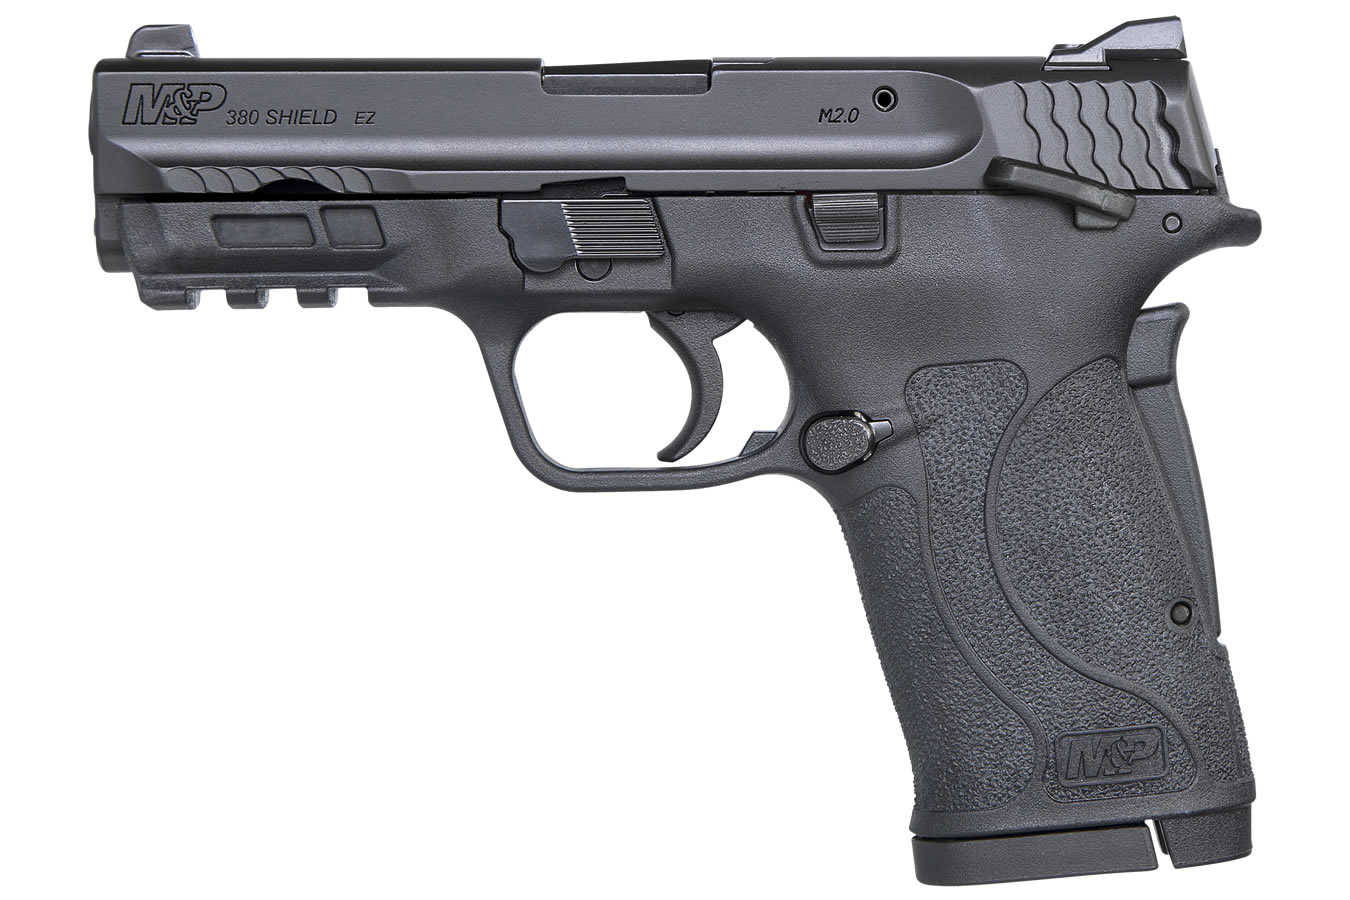 Smith & Wesson M&P380 Shield EZ 380 ACP 3.675" 8 Rd with Thumb Safety - $349.99 